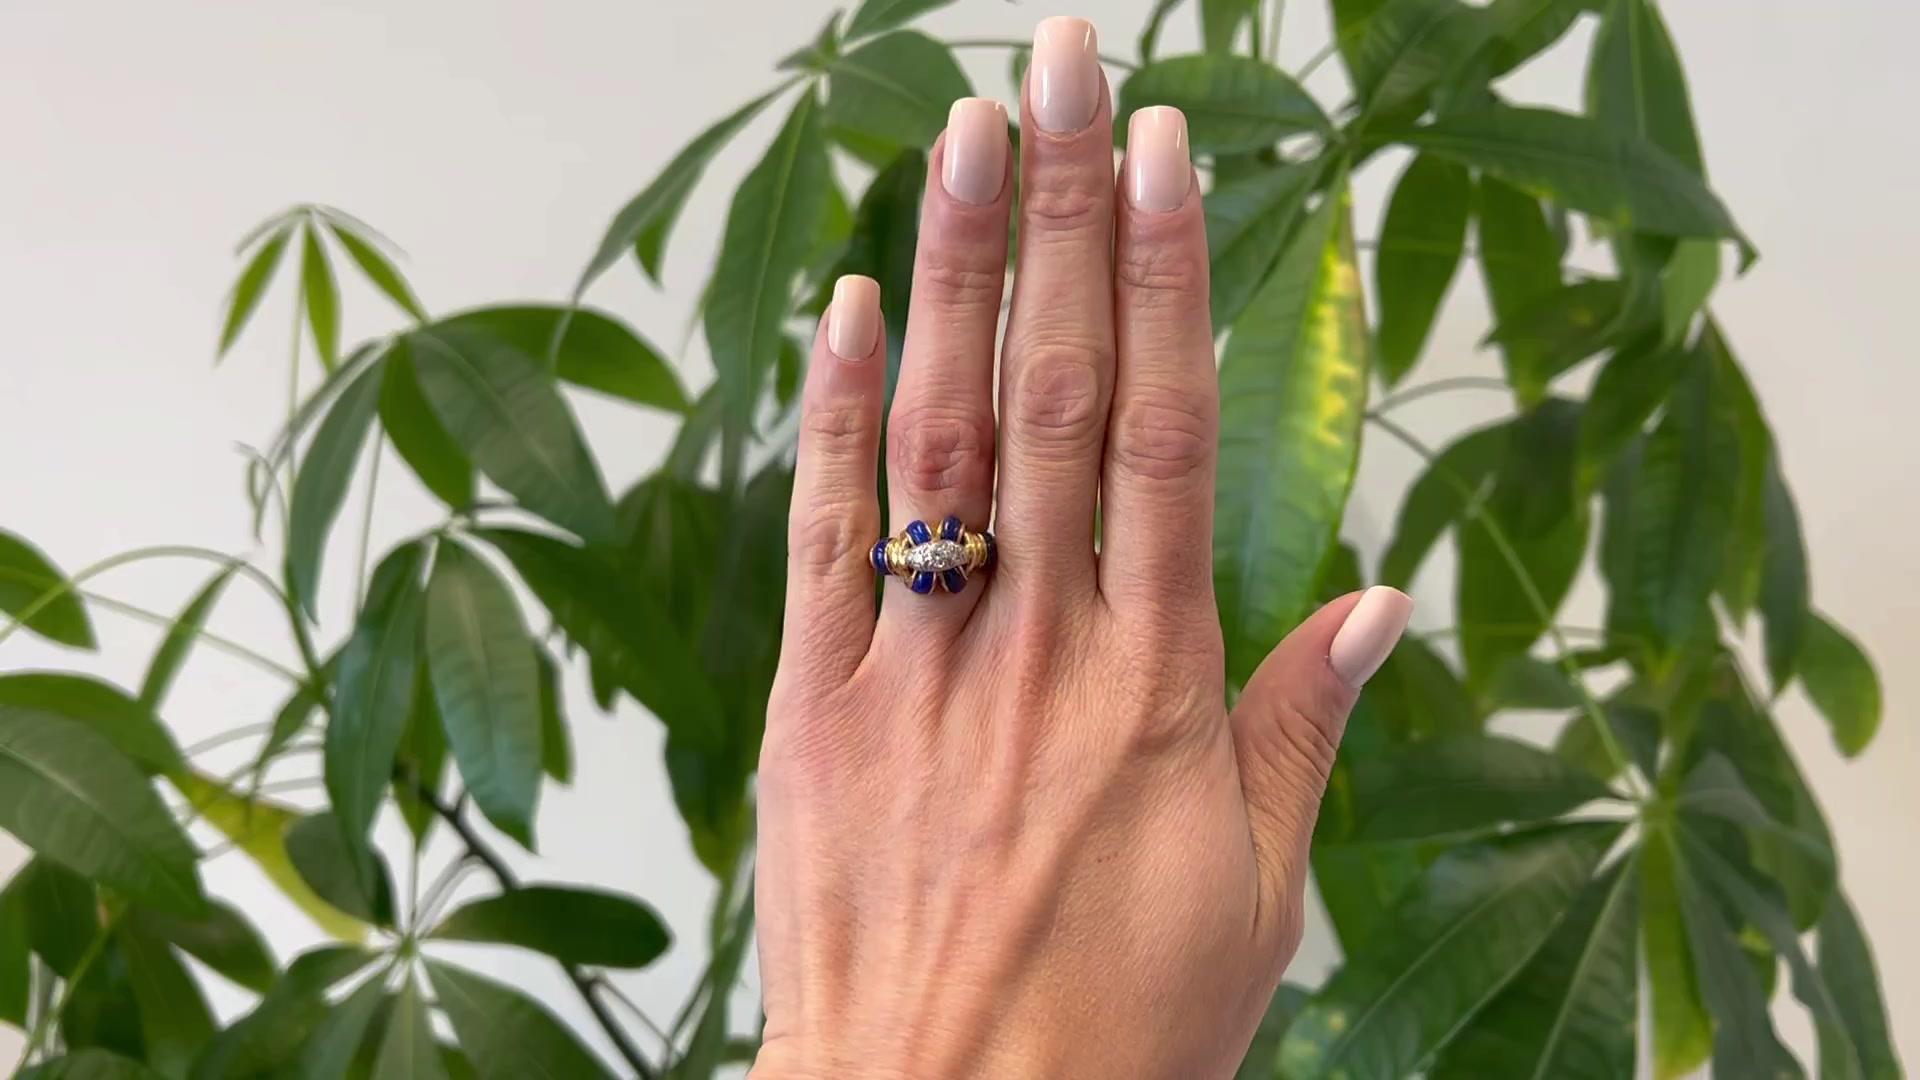 One Vintage Tiffany & Co. Diamond and Lapis 18K Yellow Gold Platinum Ring. Featuring three round brilliant cut diamonds with a total weight of approximately 0.20 carat, graded F color, VS1 clarity. Accented by six polished pieces of lapis lazuli.